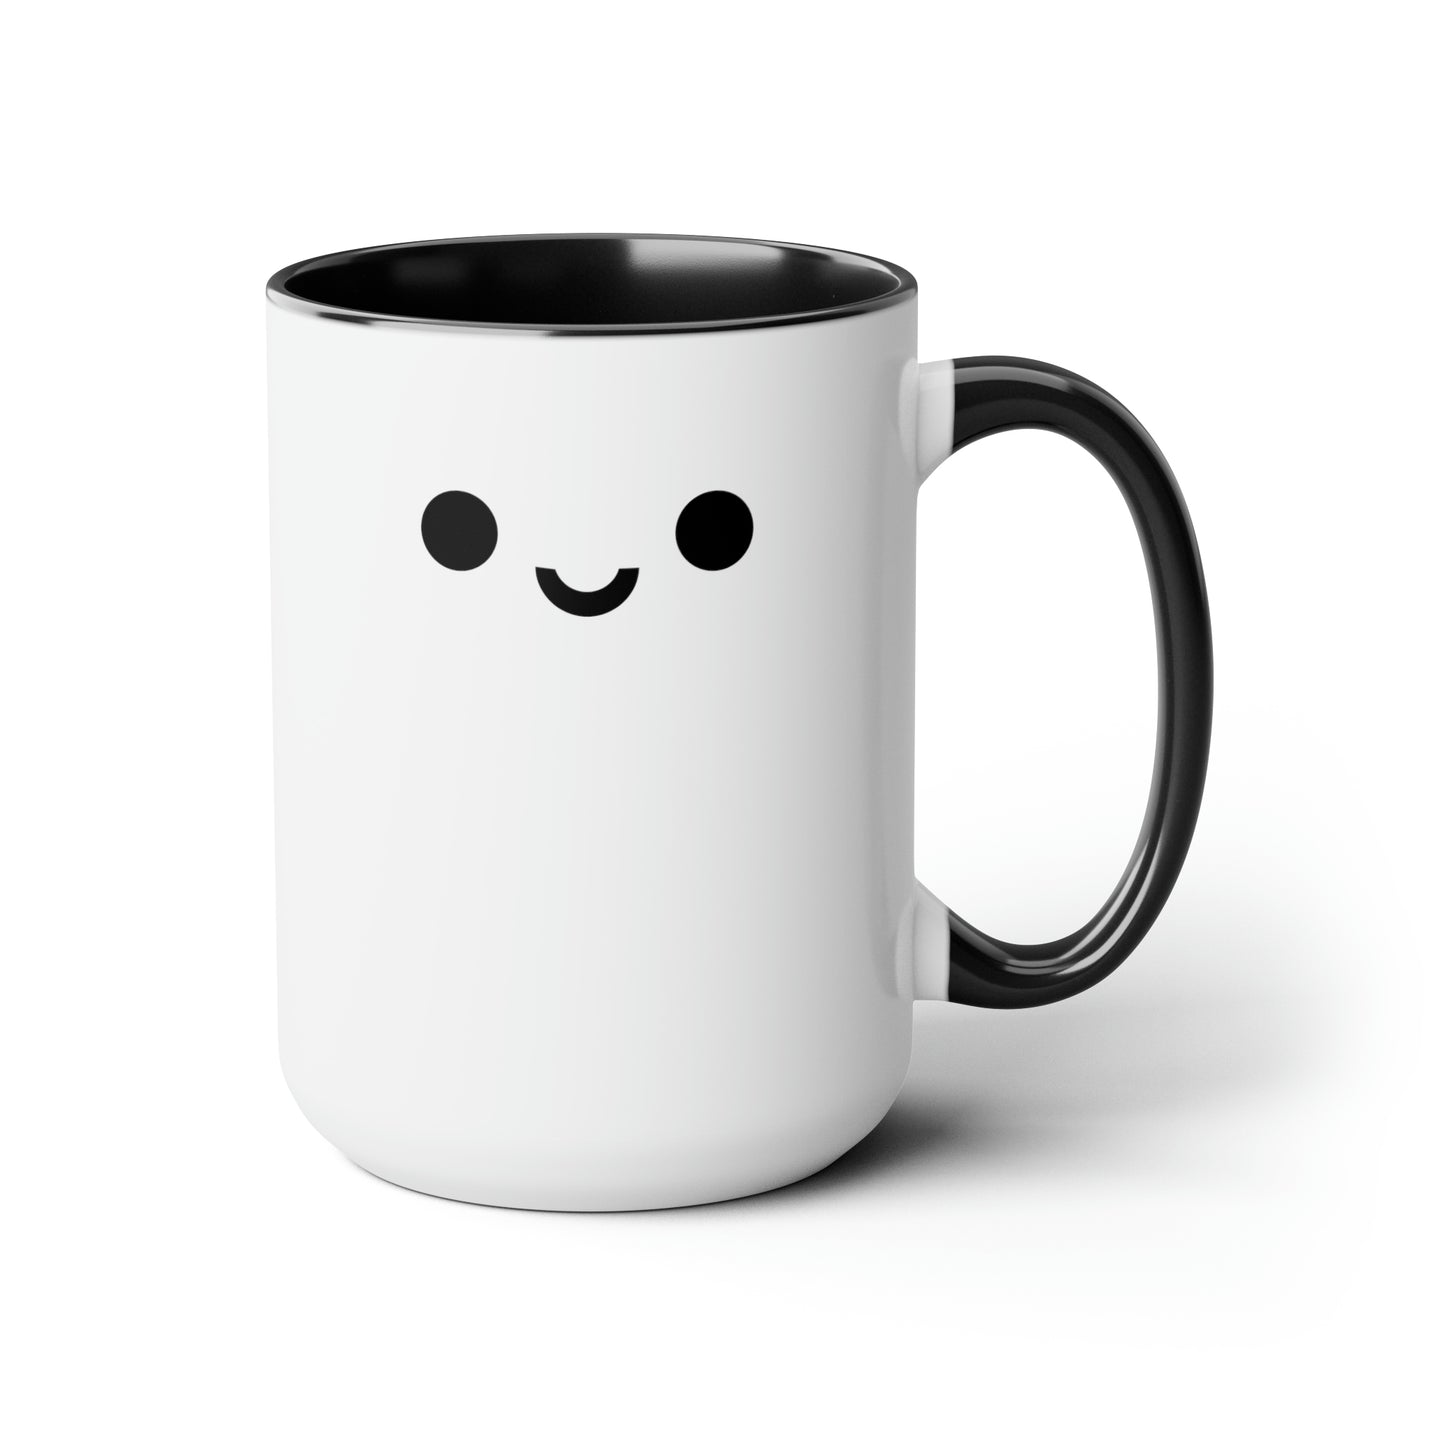 Cute Face 15oz white with black accent funny large coffee mug gift for mental health adorable friend smiling smiley kawaii face waveywares wavey wares wavywares wavy wares